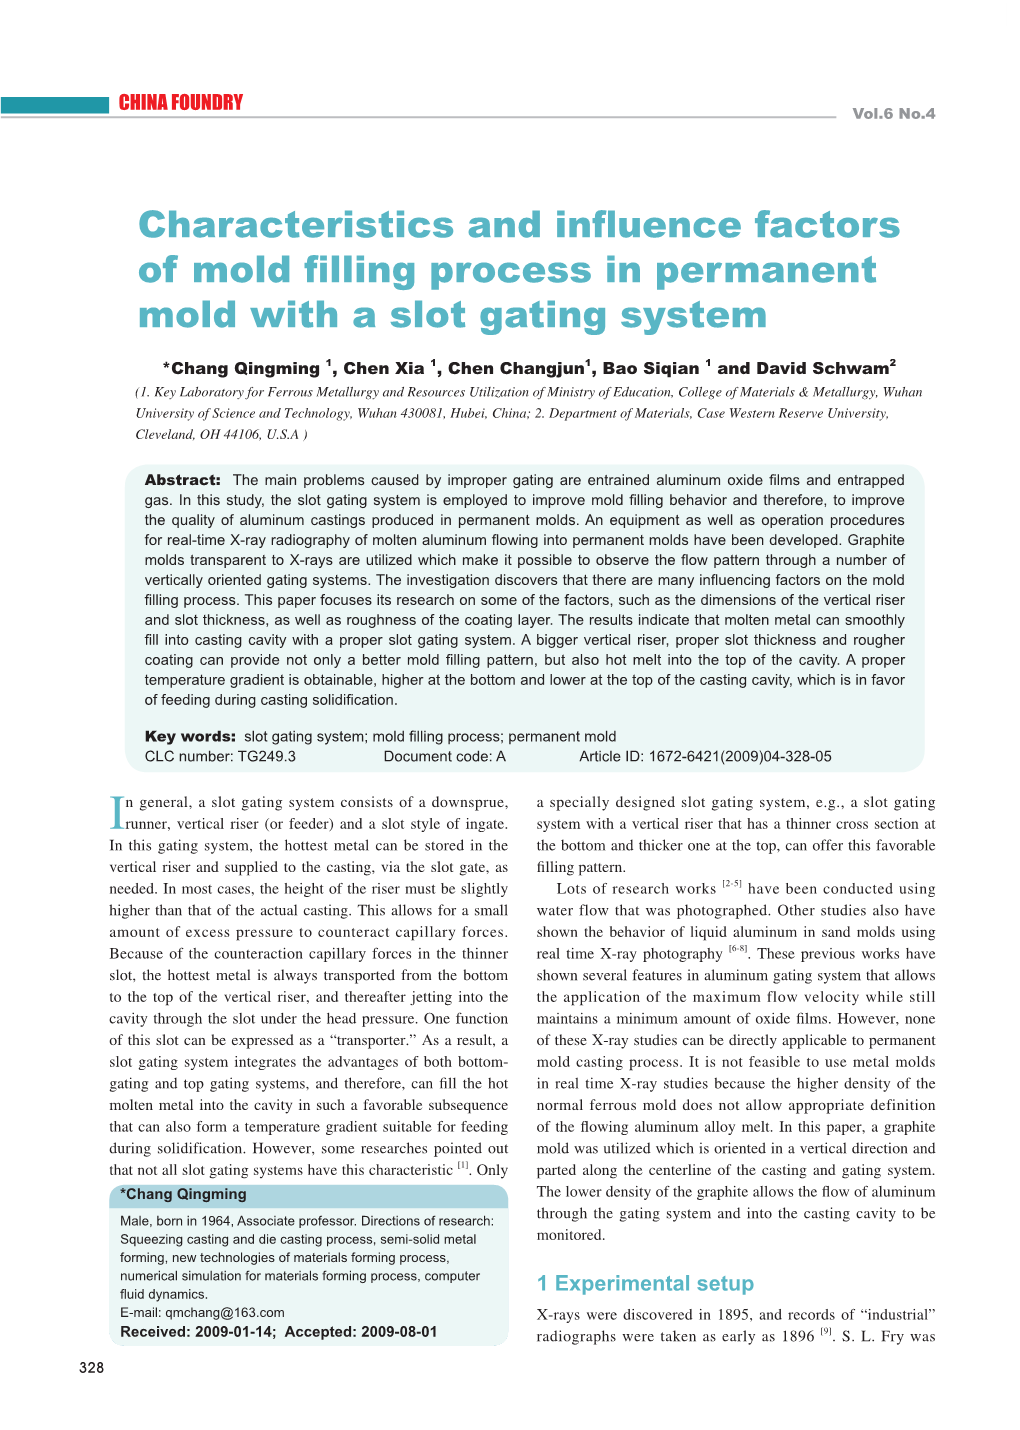 Characteristics and Influence Factors of Mold Filling Process in Permanent